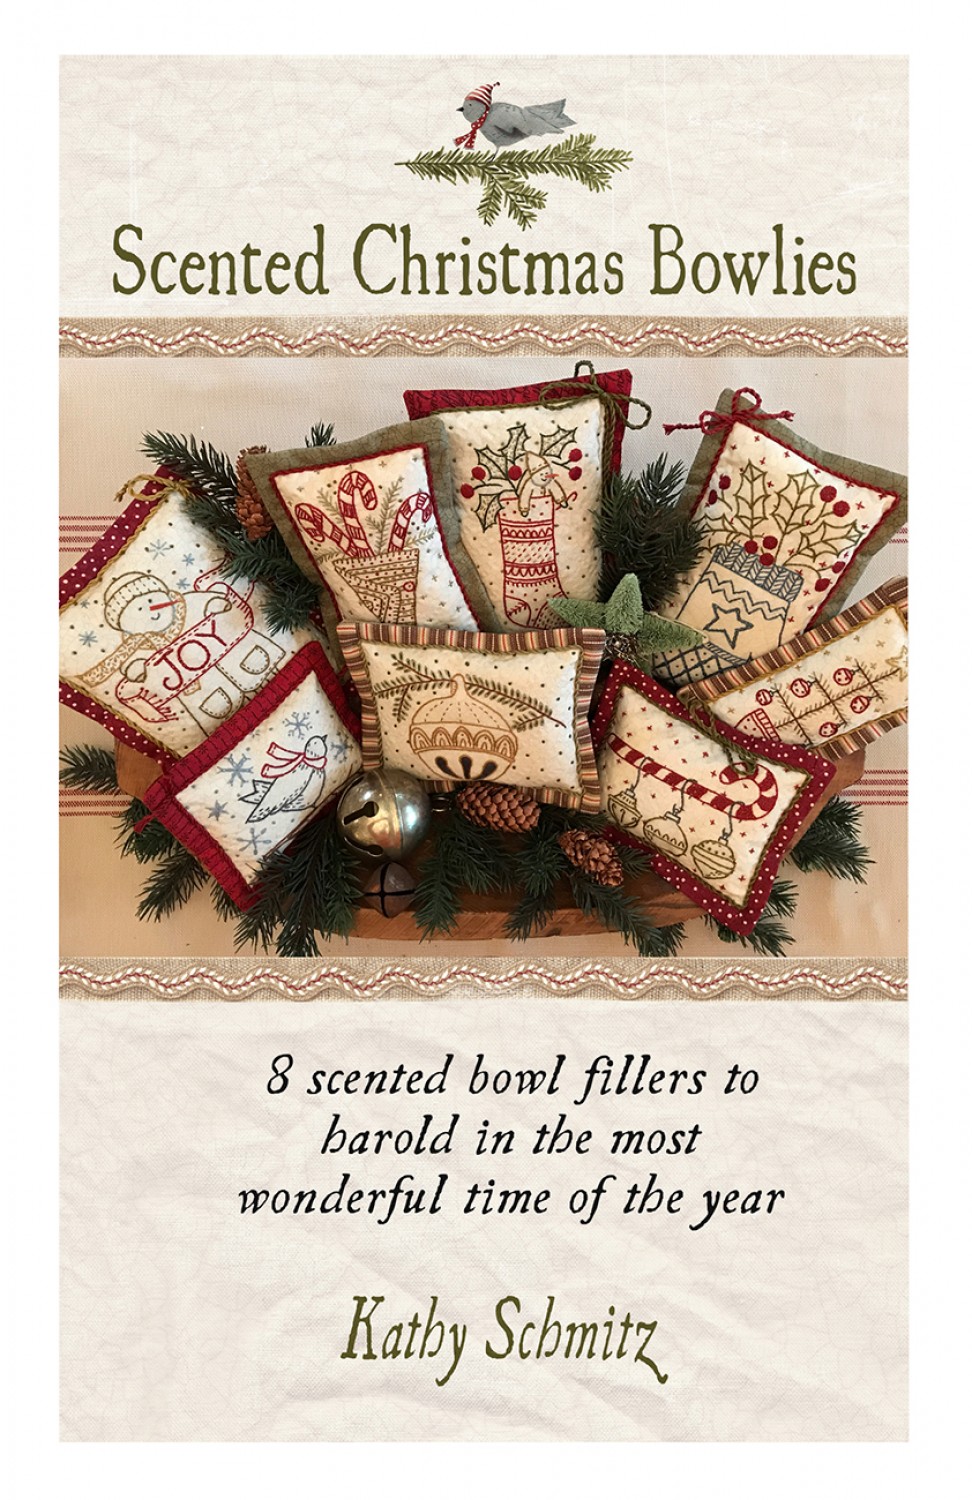 Scented Christmas Bowlies Pattern